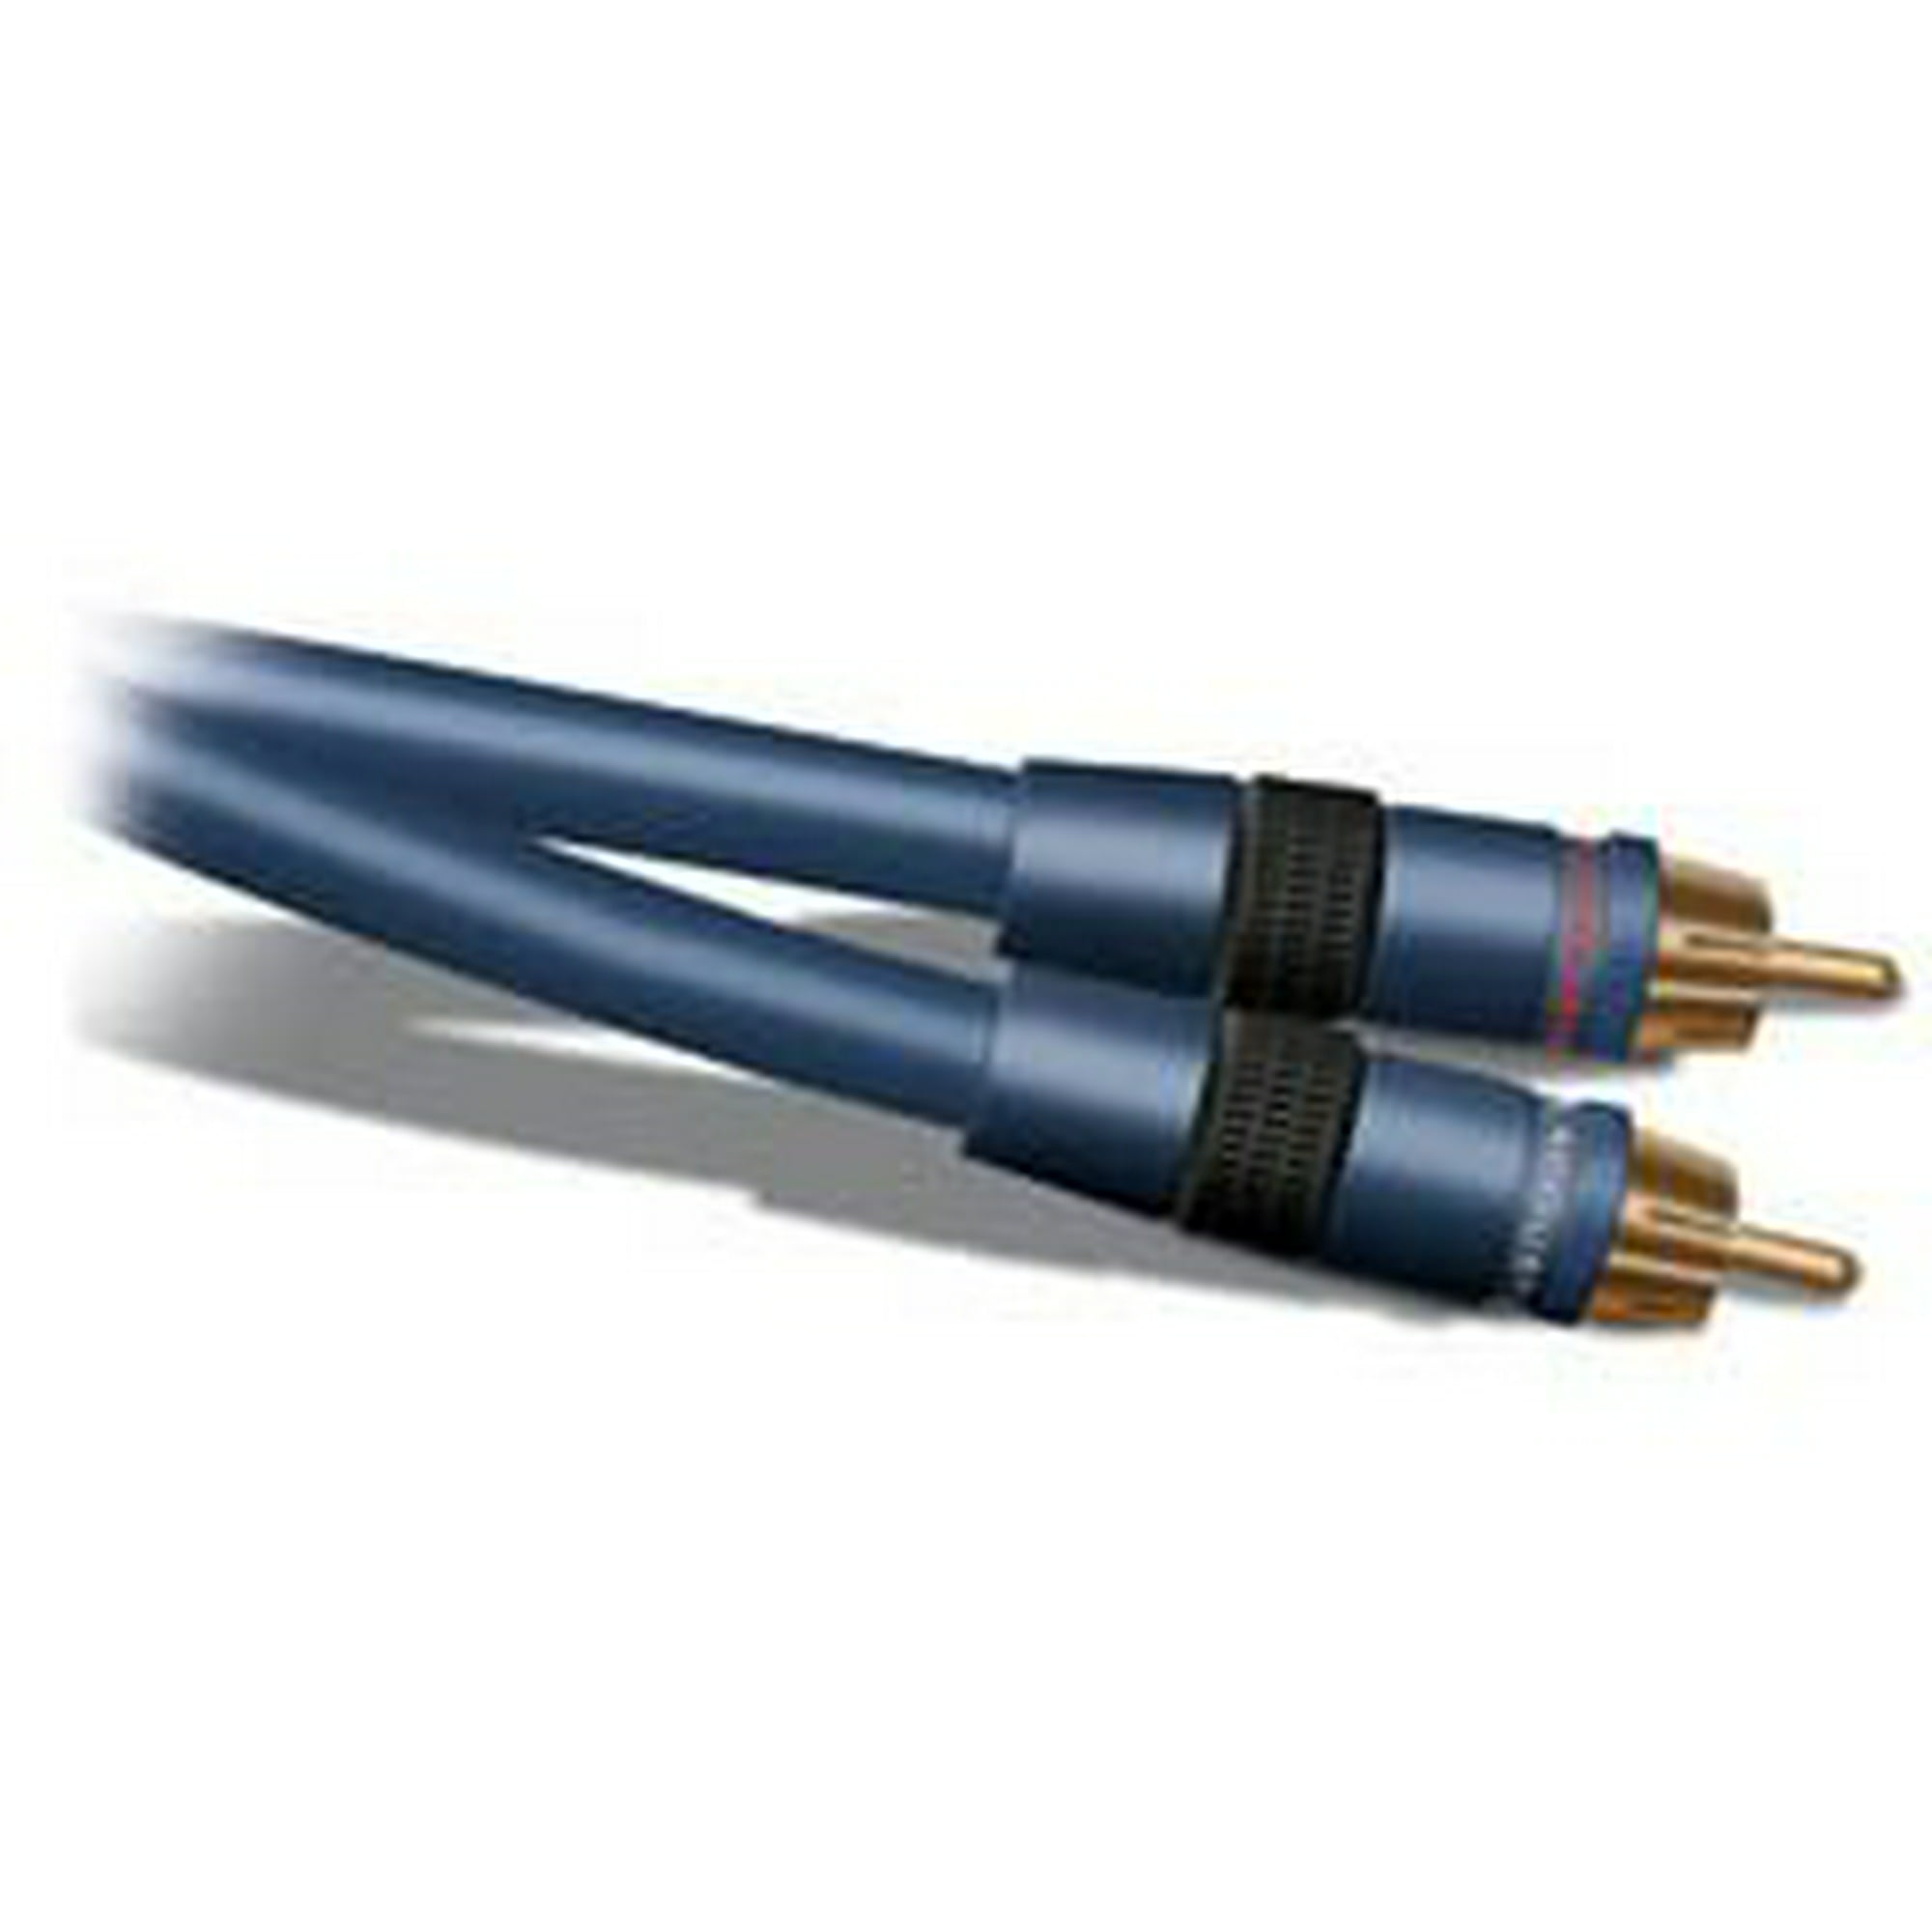 Acoustic Research AP053 Subwoofer RCA to RCA Cable molded connectors 25 feet